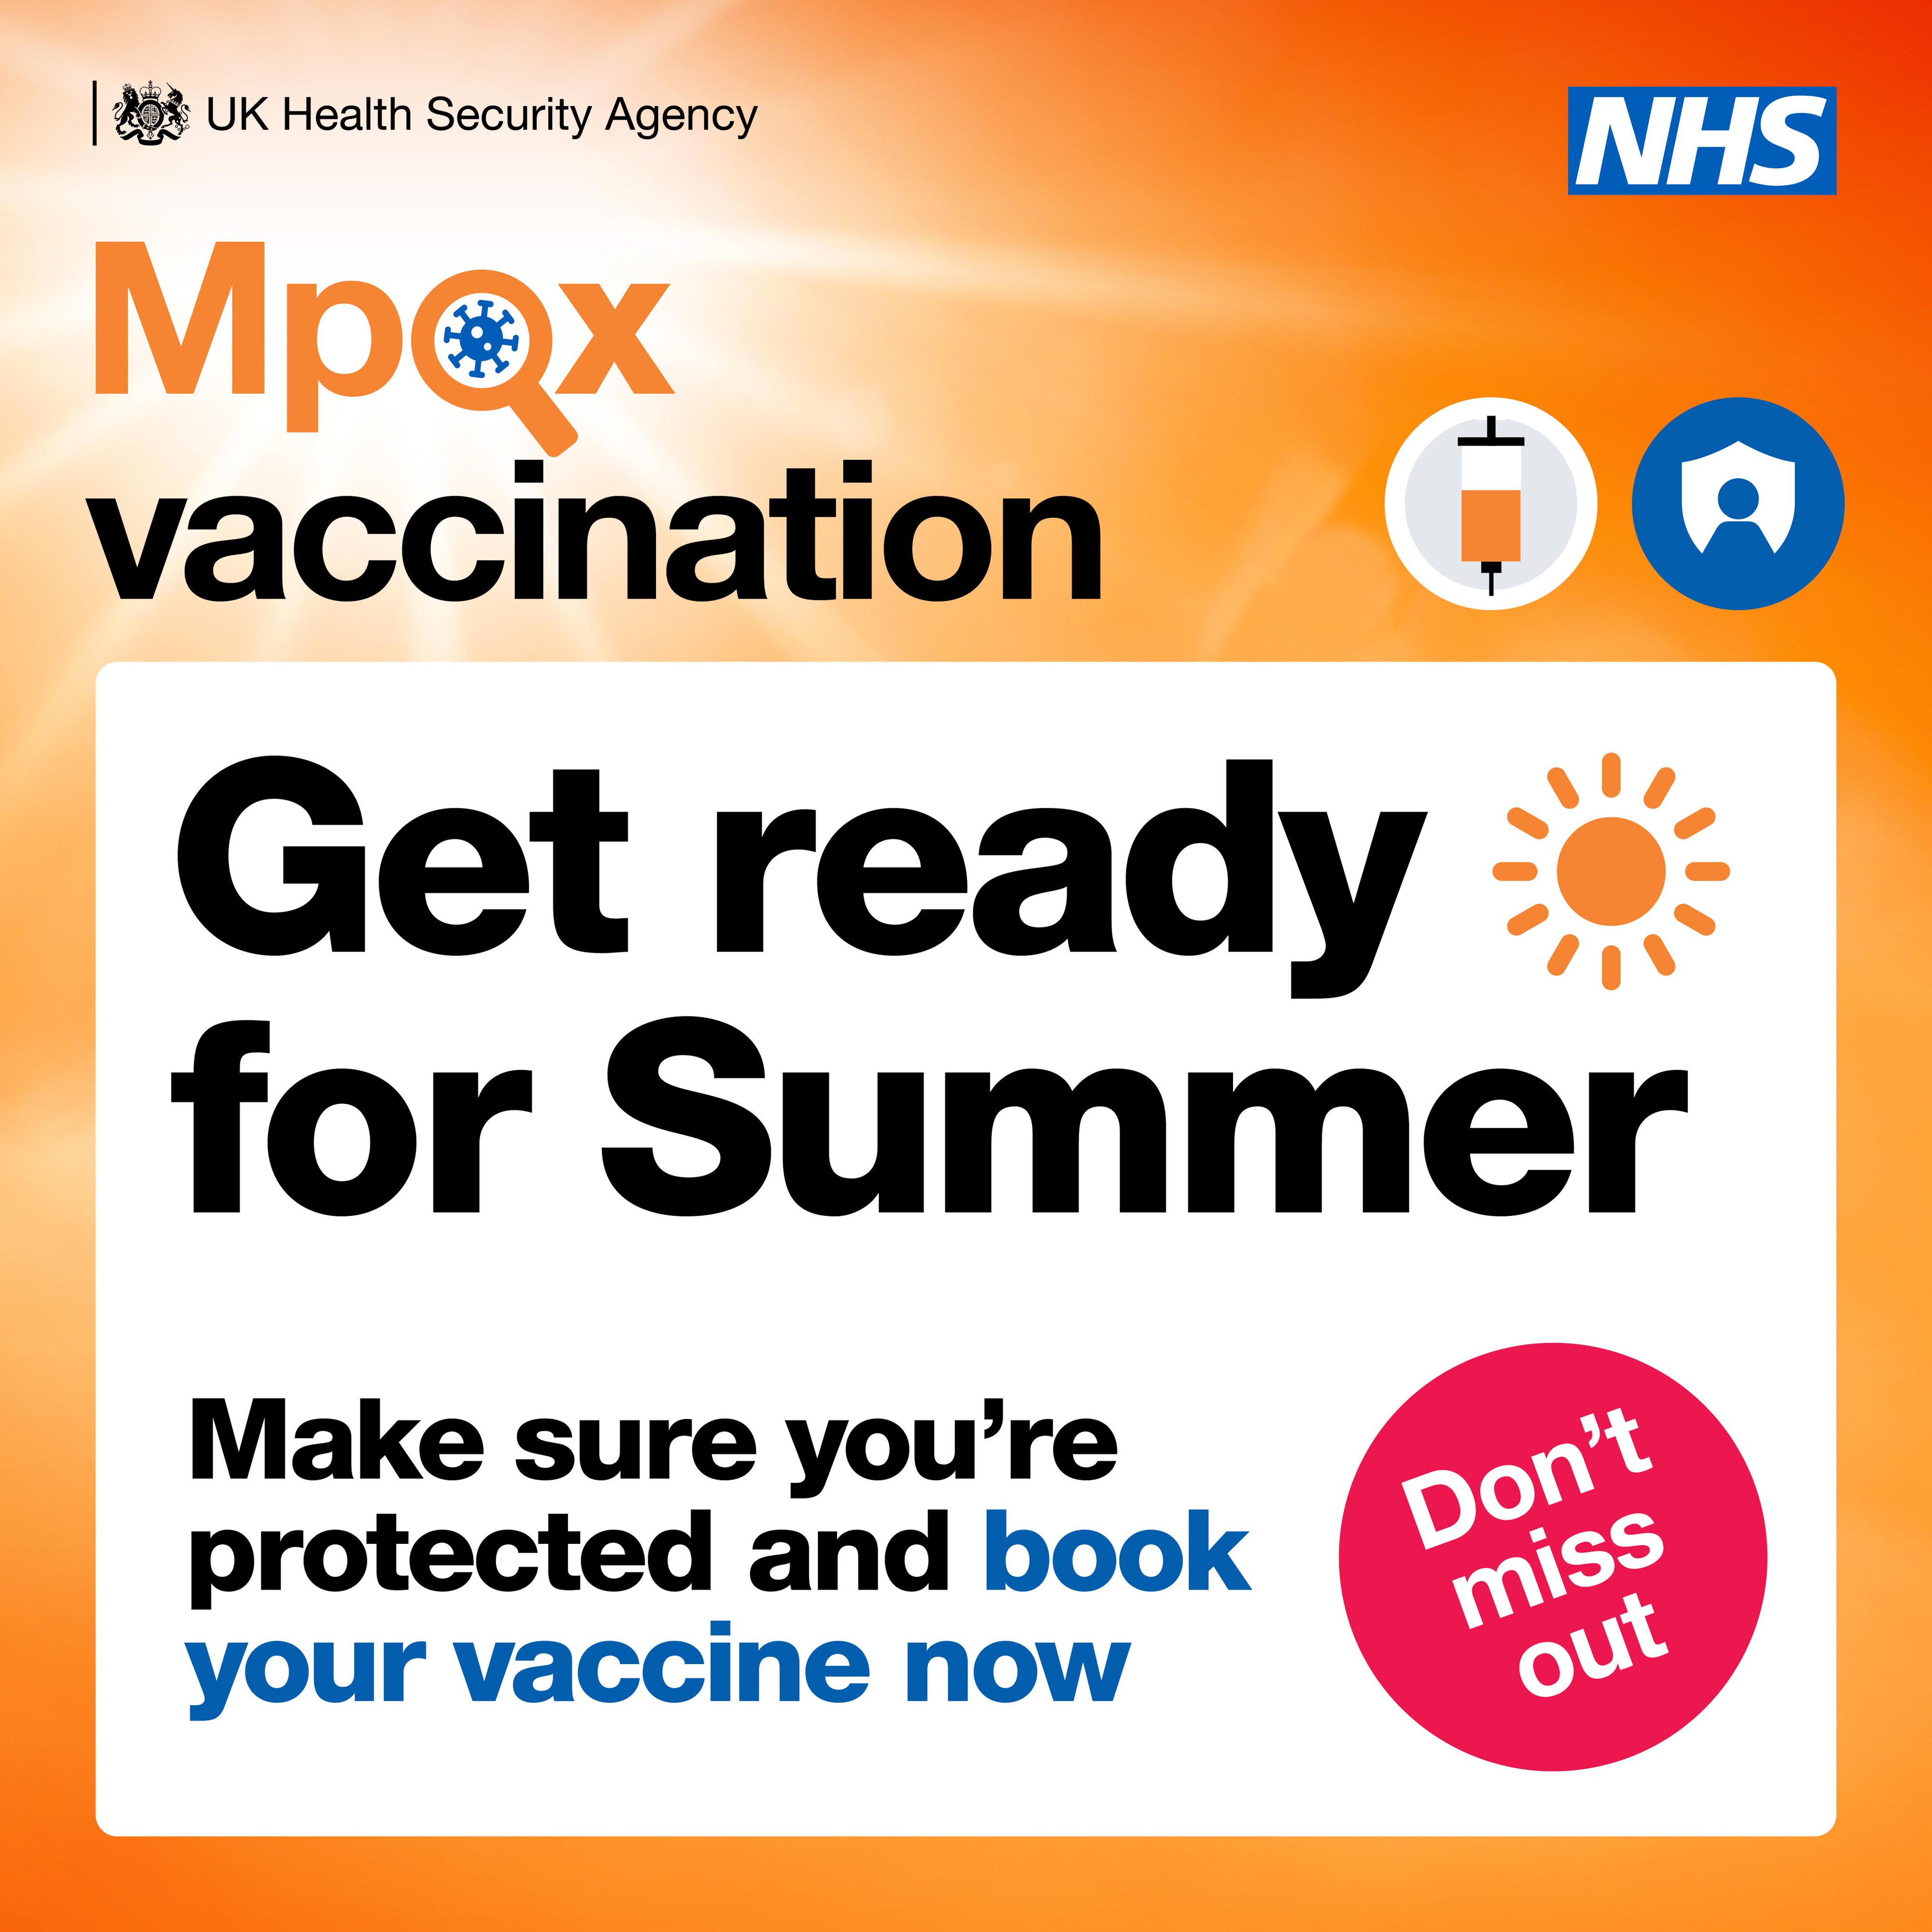 Image depicts mpox vaccination - get ready for summer.